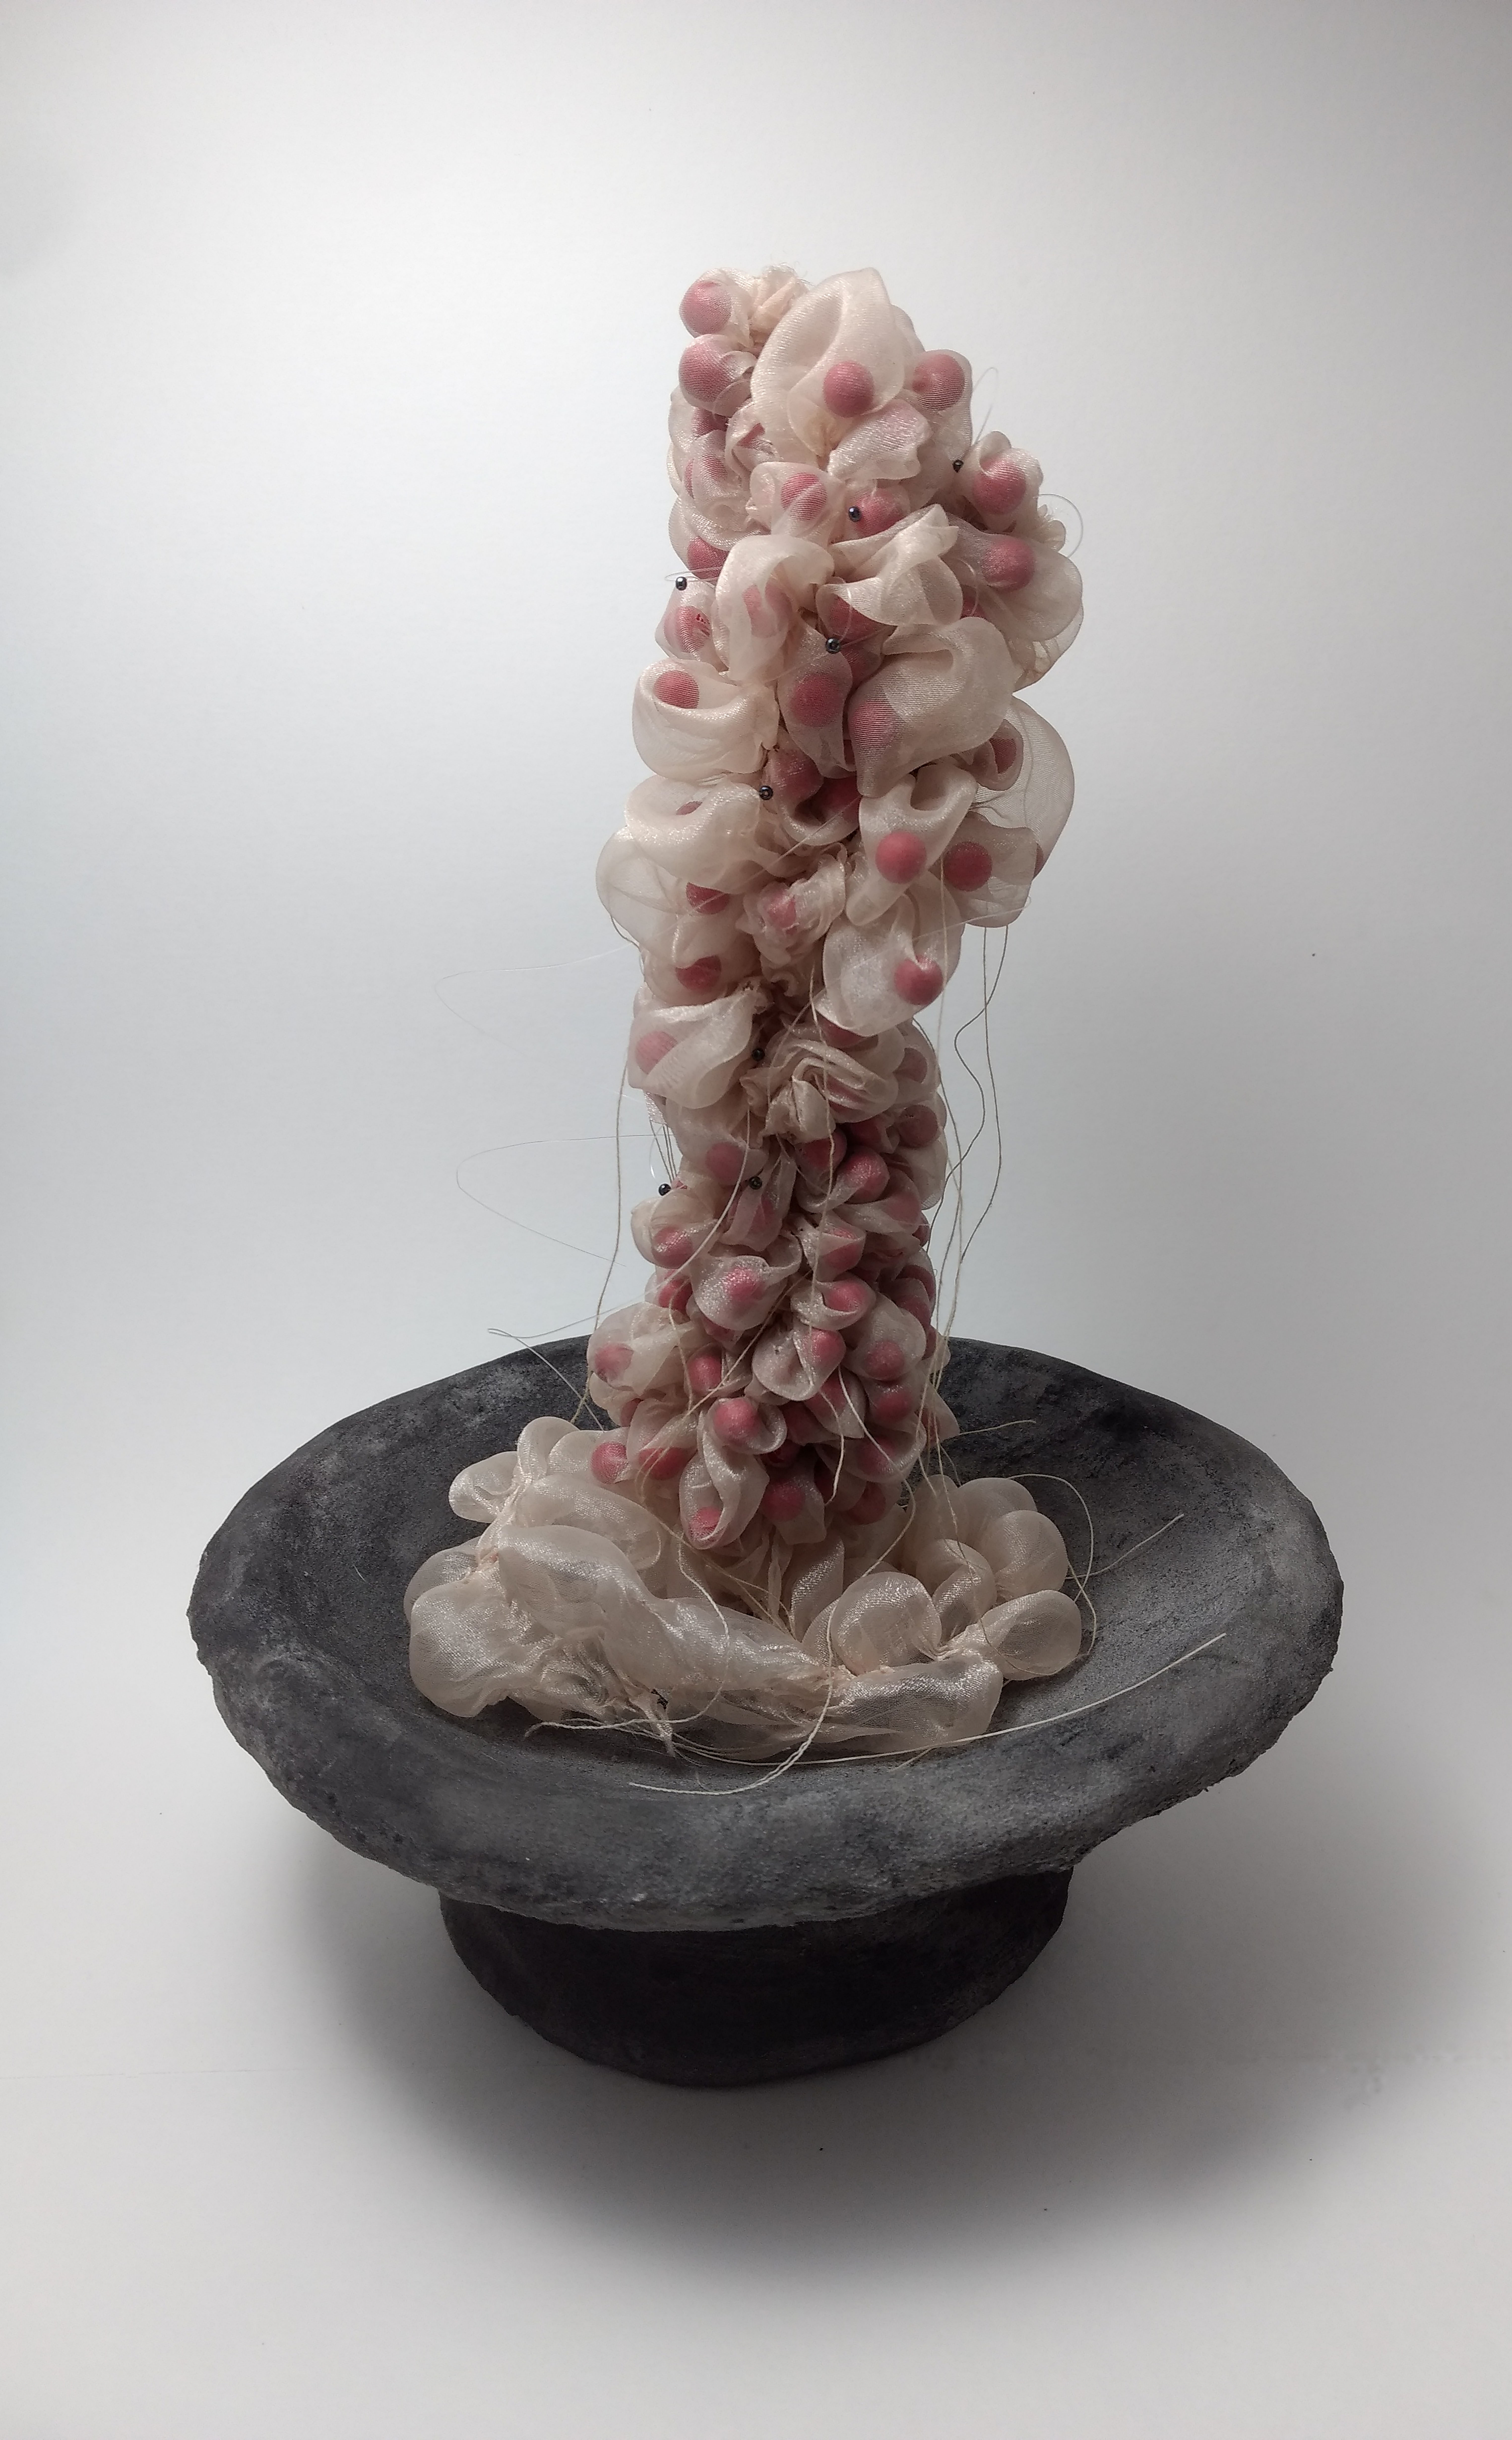 Art: sculpture featuring fabric stretched over red "eye"-type balls, growing out of a grey bowl